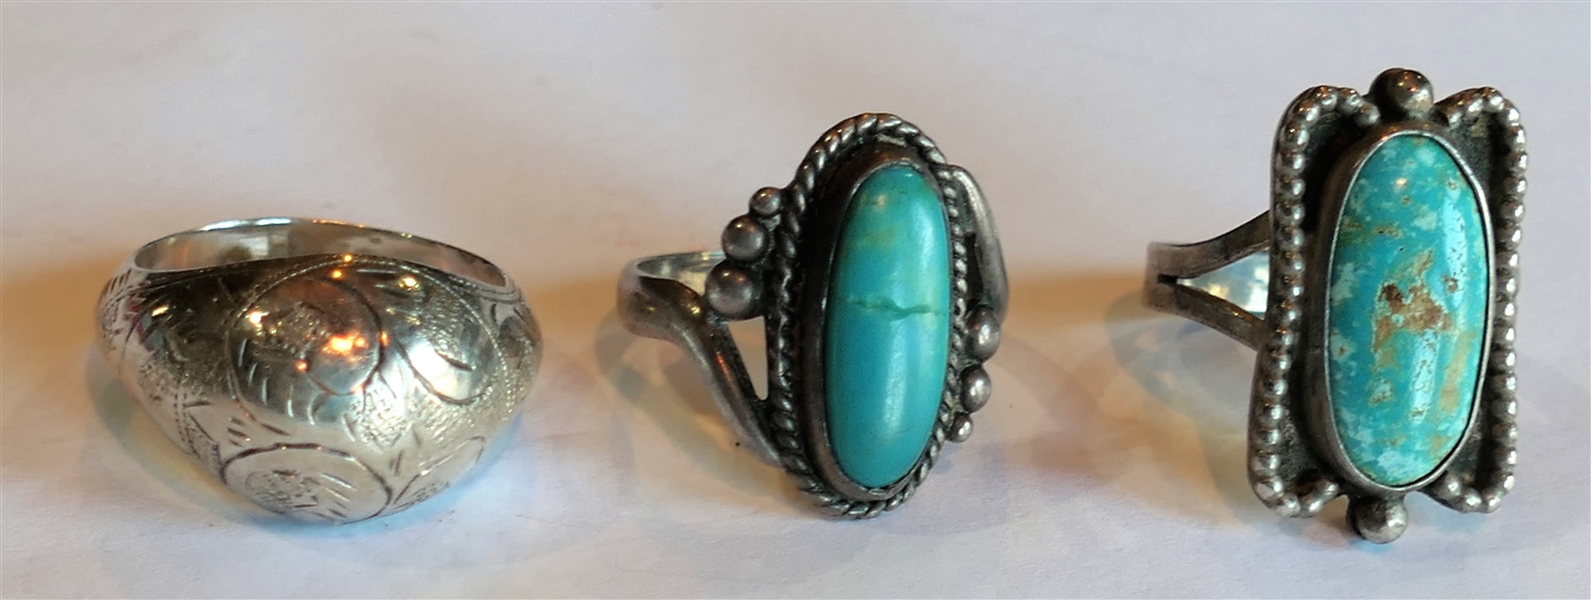 3 Rings - Siam Sterling Dome Ring Size 7 1/4, Bell Sterling with Cracked Turquoise Stone Size 6 1/4, and Silver and Turquoise Ring Size 5 3/4